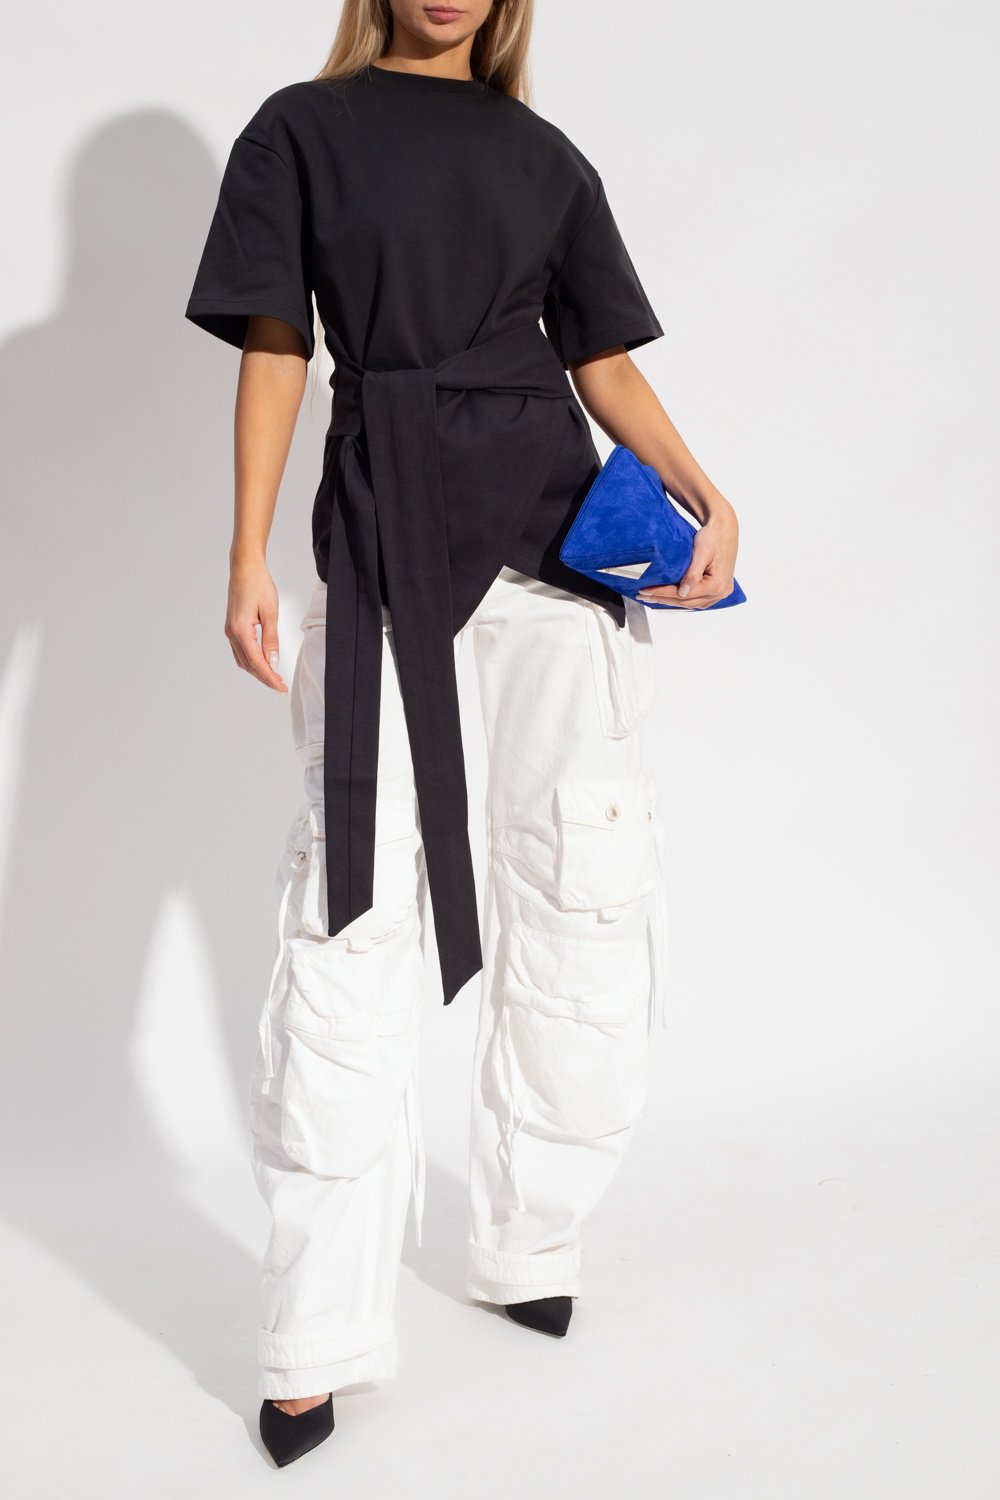 The Attico ‘Mabel’ asymmetric T-shirt with tie waist